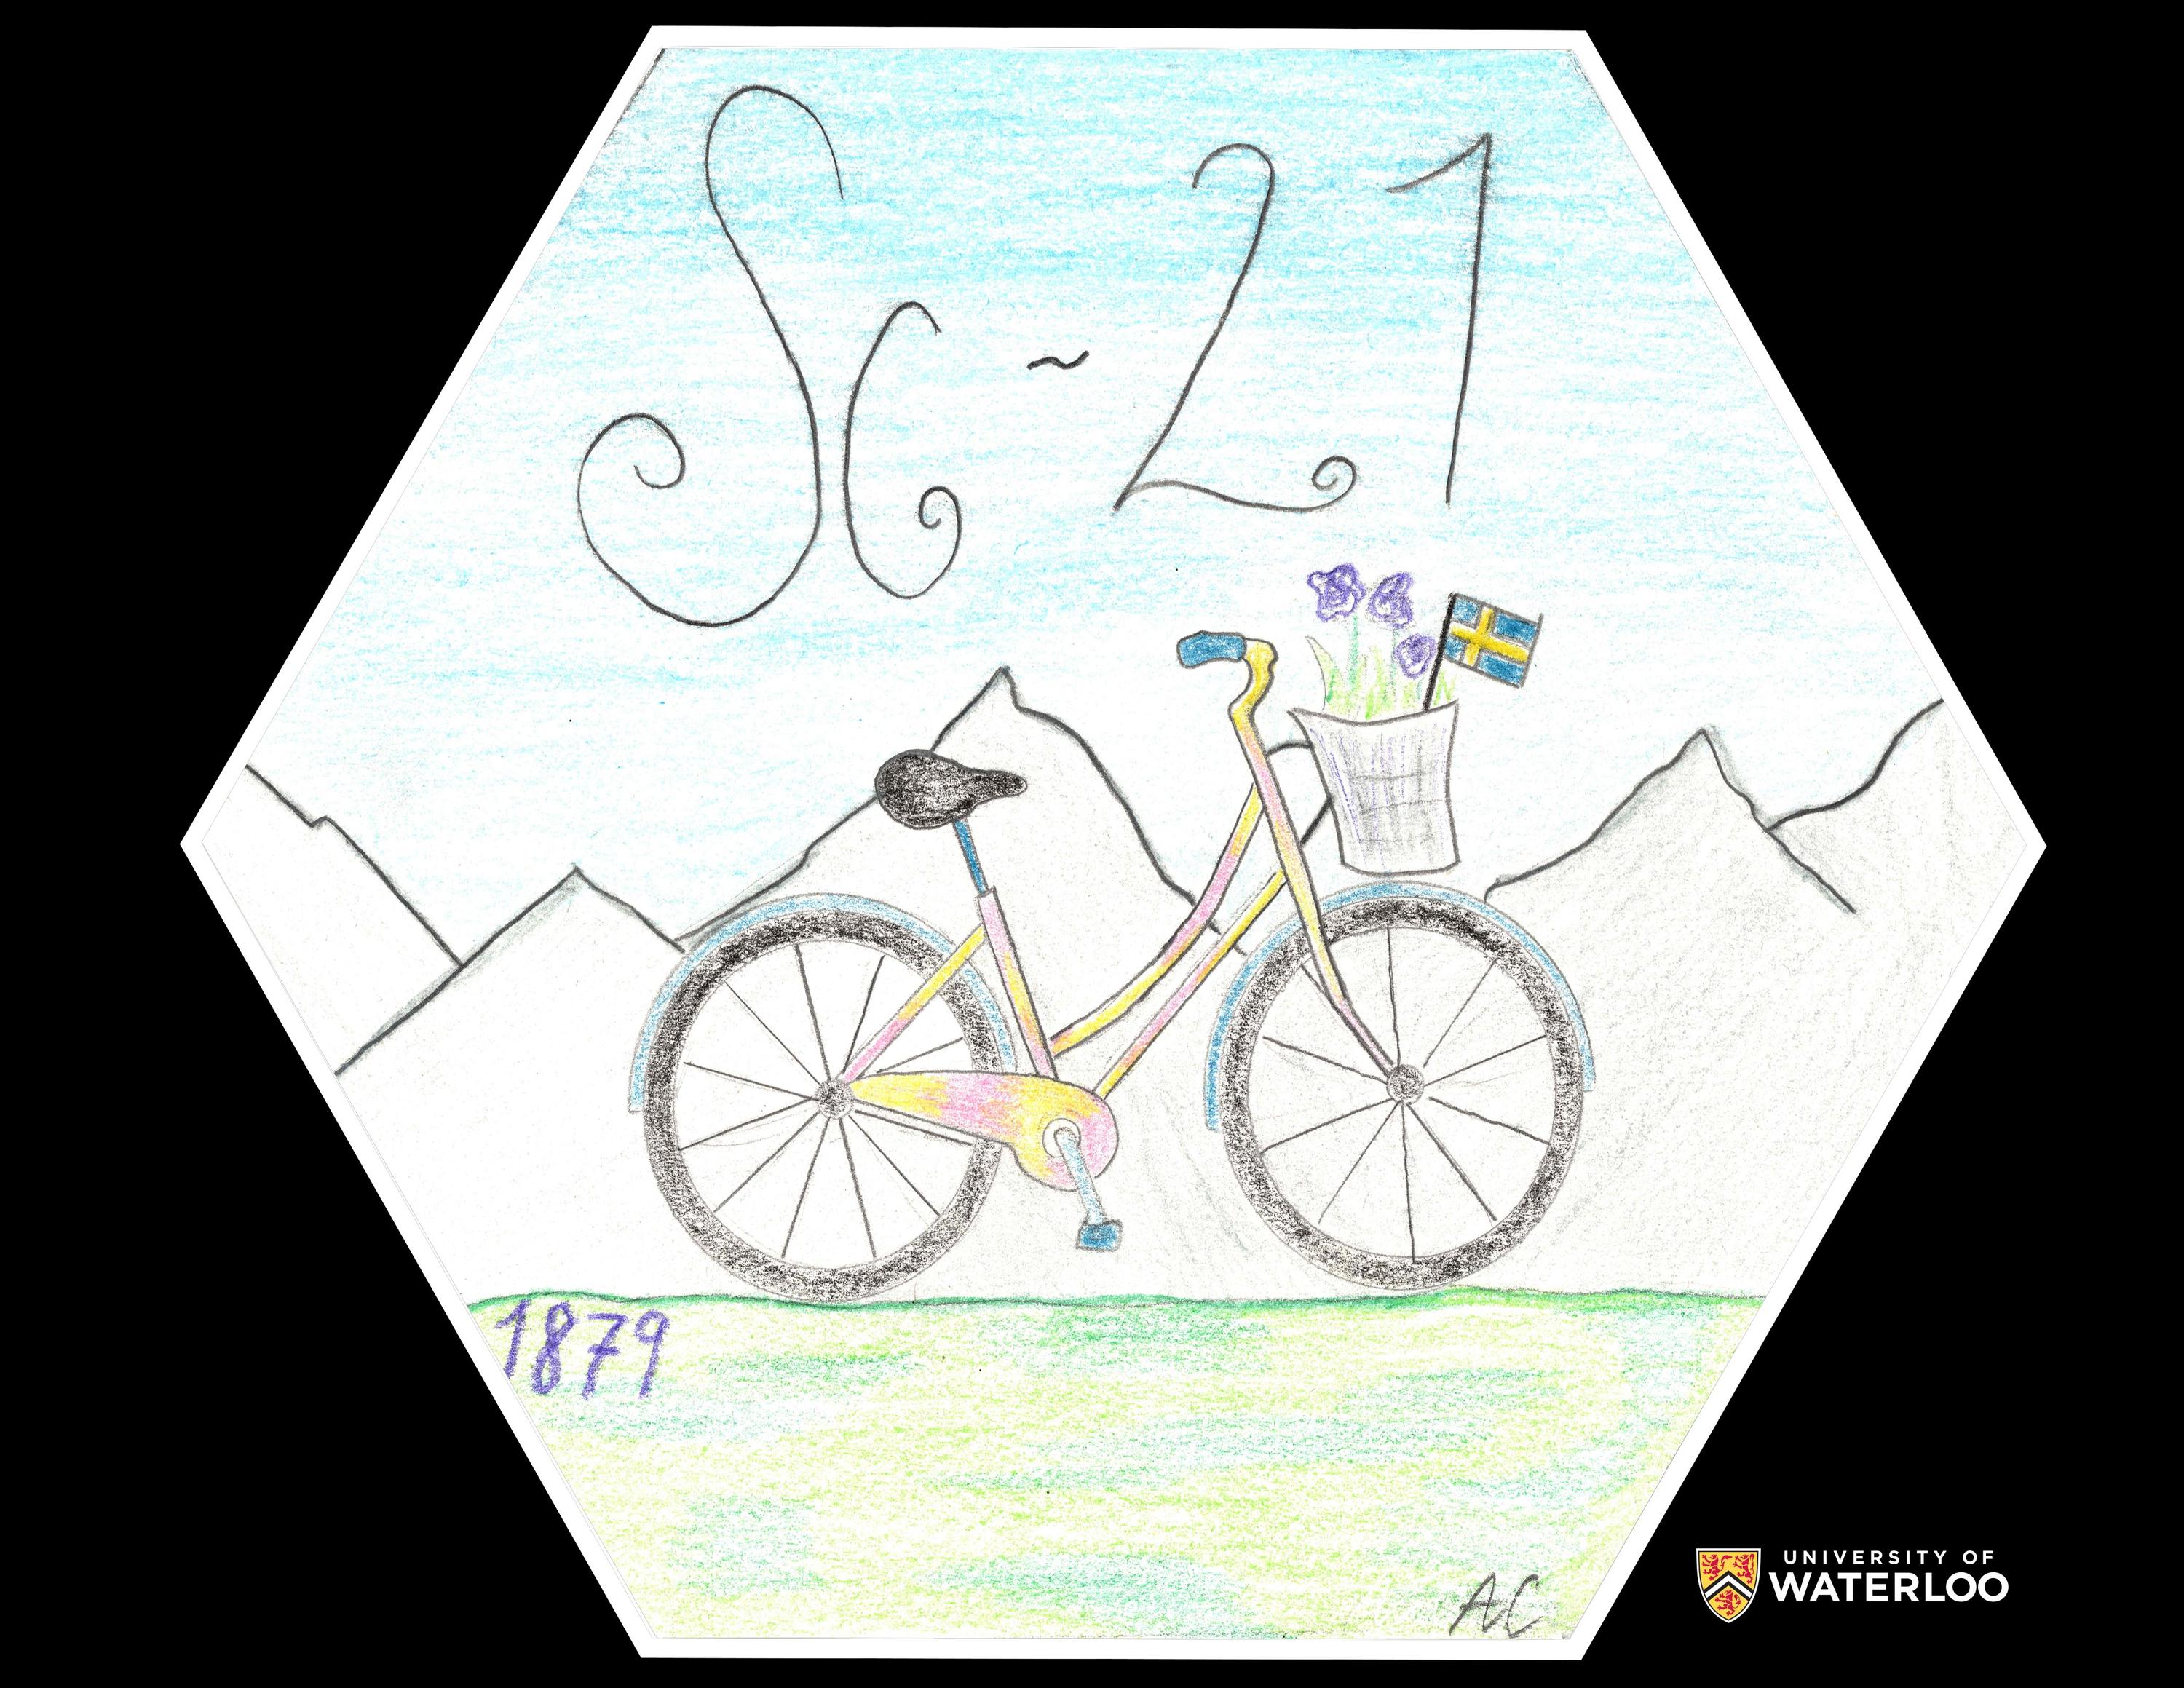 Coloured pencil on paper. Chemical symbol and atomic number “Sc – 21” featured at the top. Centre shows a bicycle with a Swedish flag in front of a mountain landscape. “1879” appears in the lower left corner.